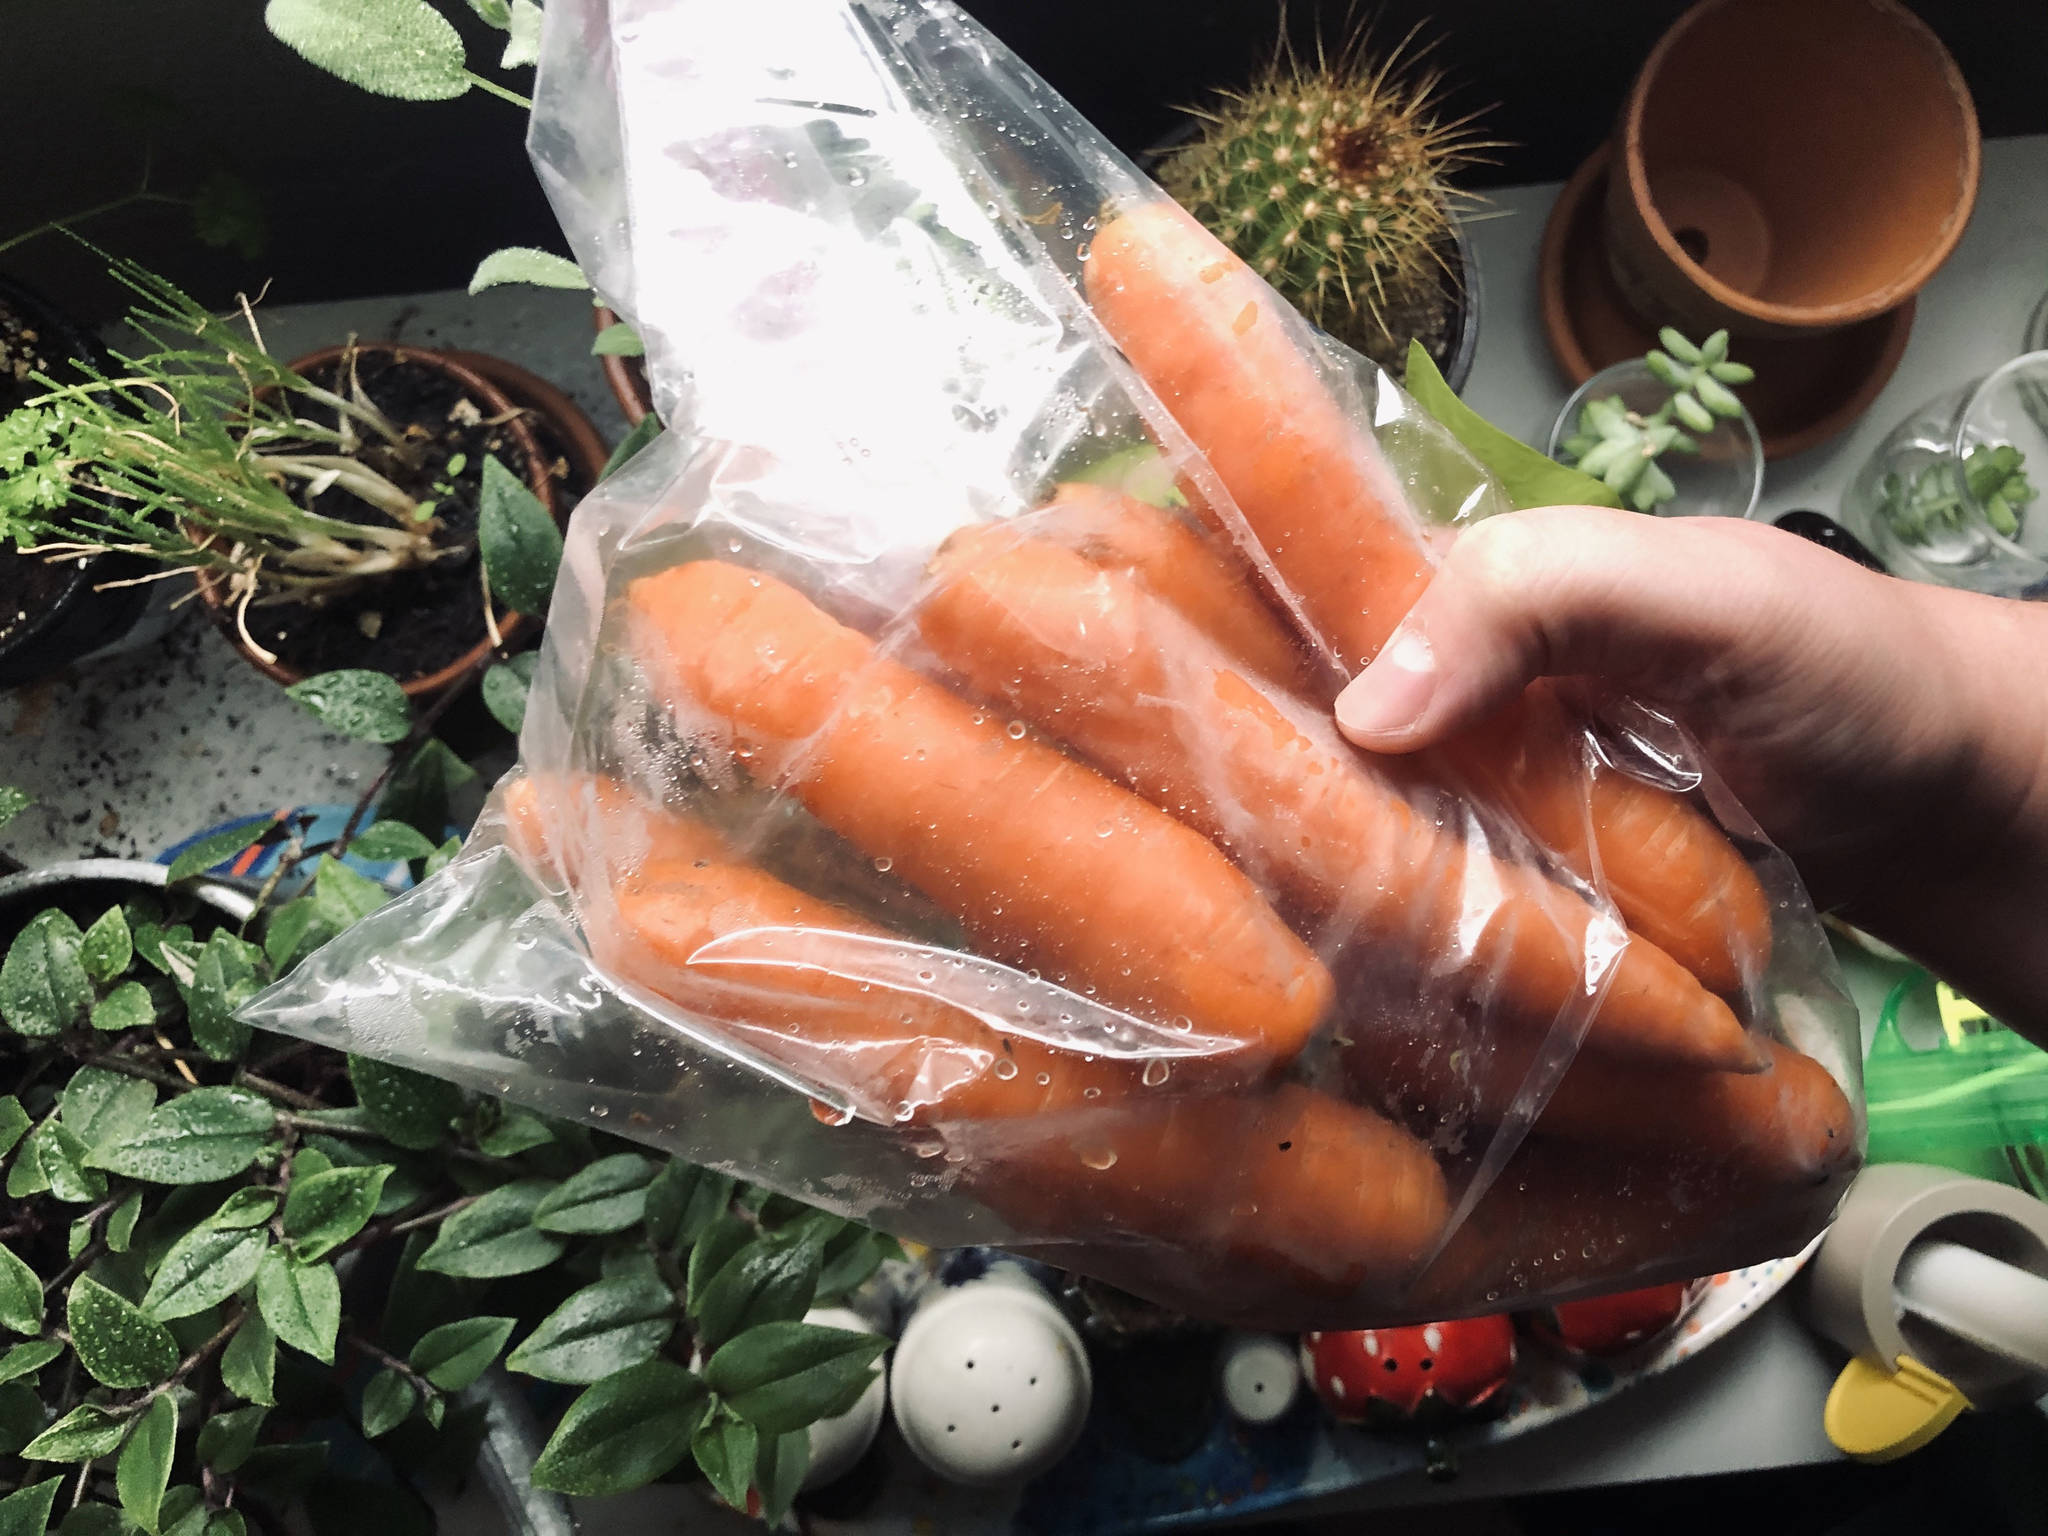 A bag of carrots I picked up from my neighborhood farmers market, on Tuesday, Sept. 15, 2020 in Anchorage, Alaska. (Photo by Victoria Petersen/Peninsula Clarion)